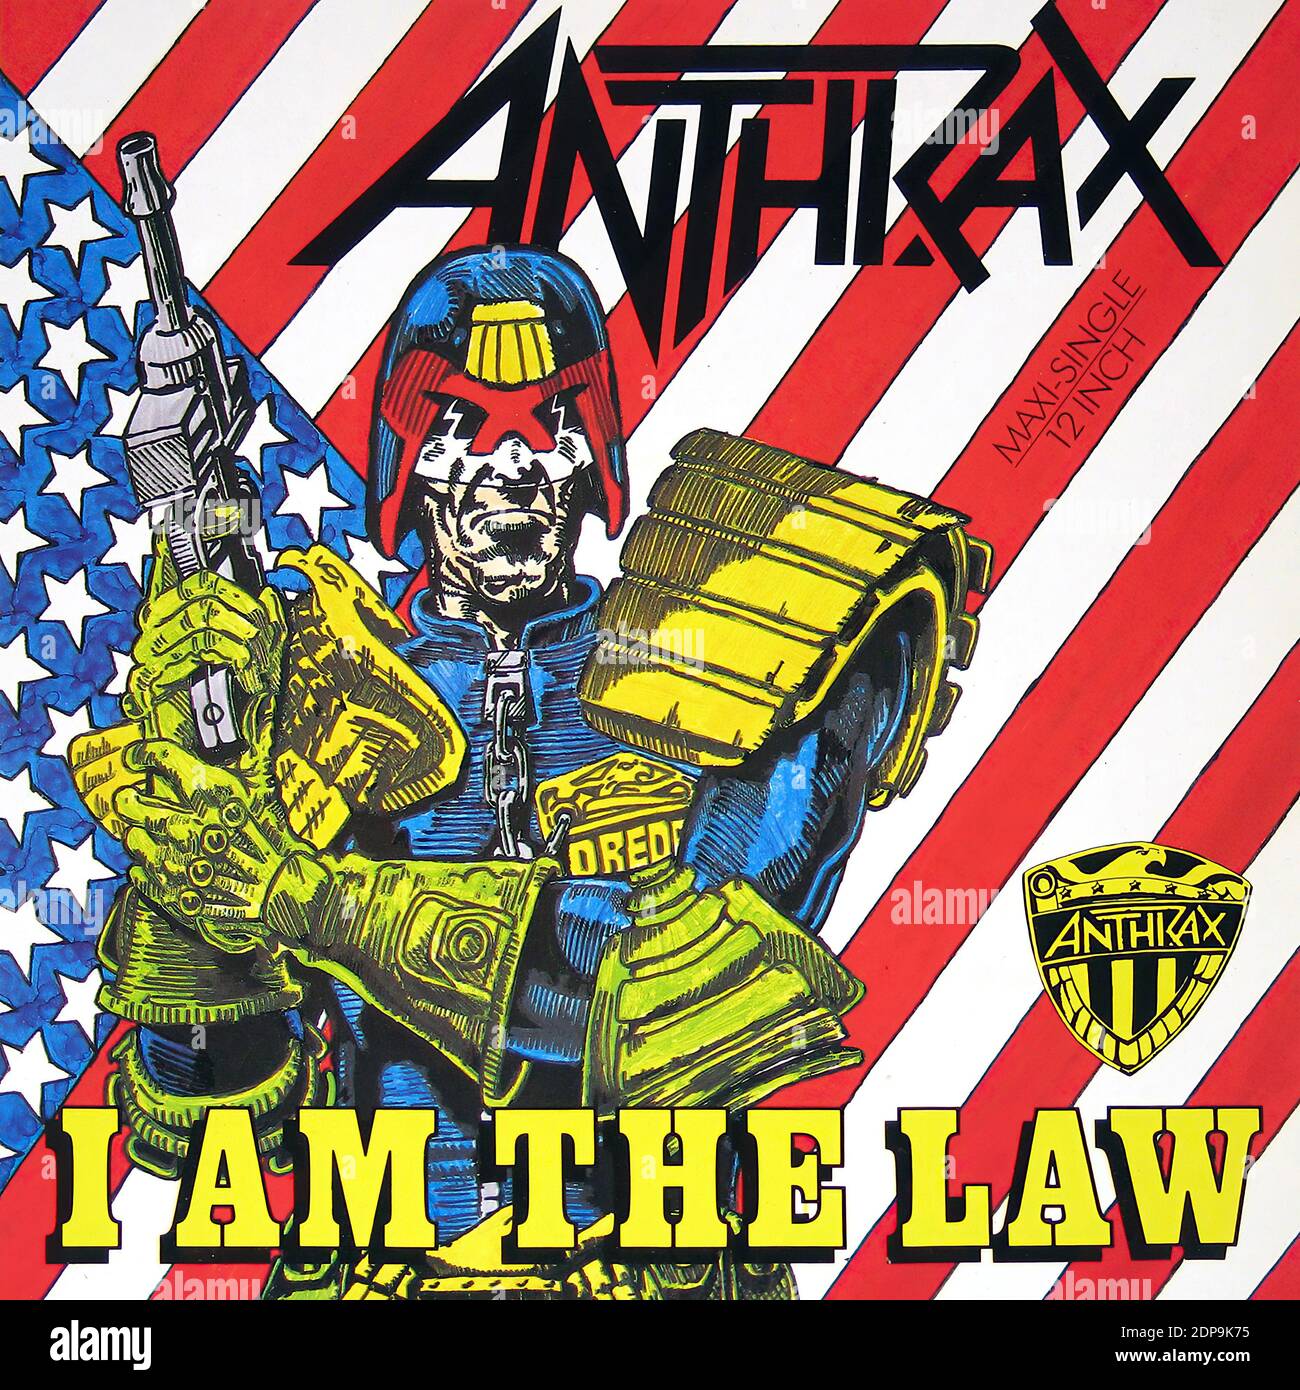 Anthrax I Am The Law 12  Vinyl Single  - Vintage Vinyl Record Cover Stock Photo